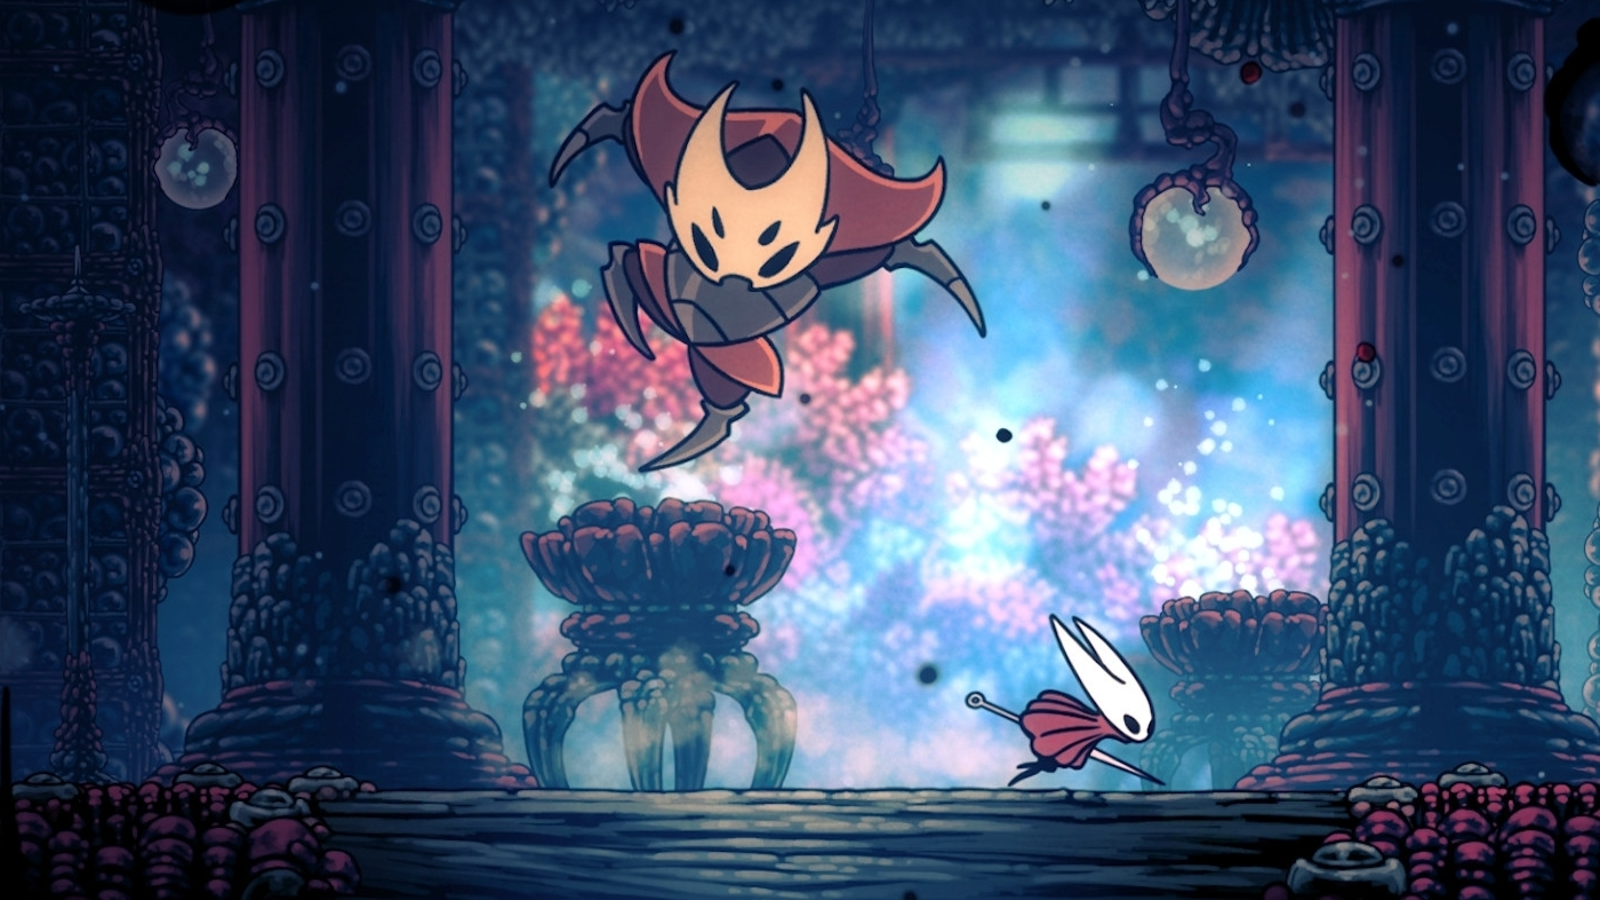 GIT GUD! (Late game spoilers) : HollowKnight